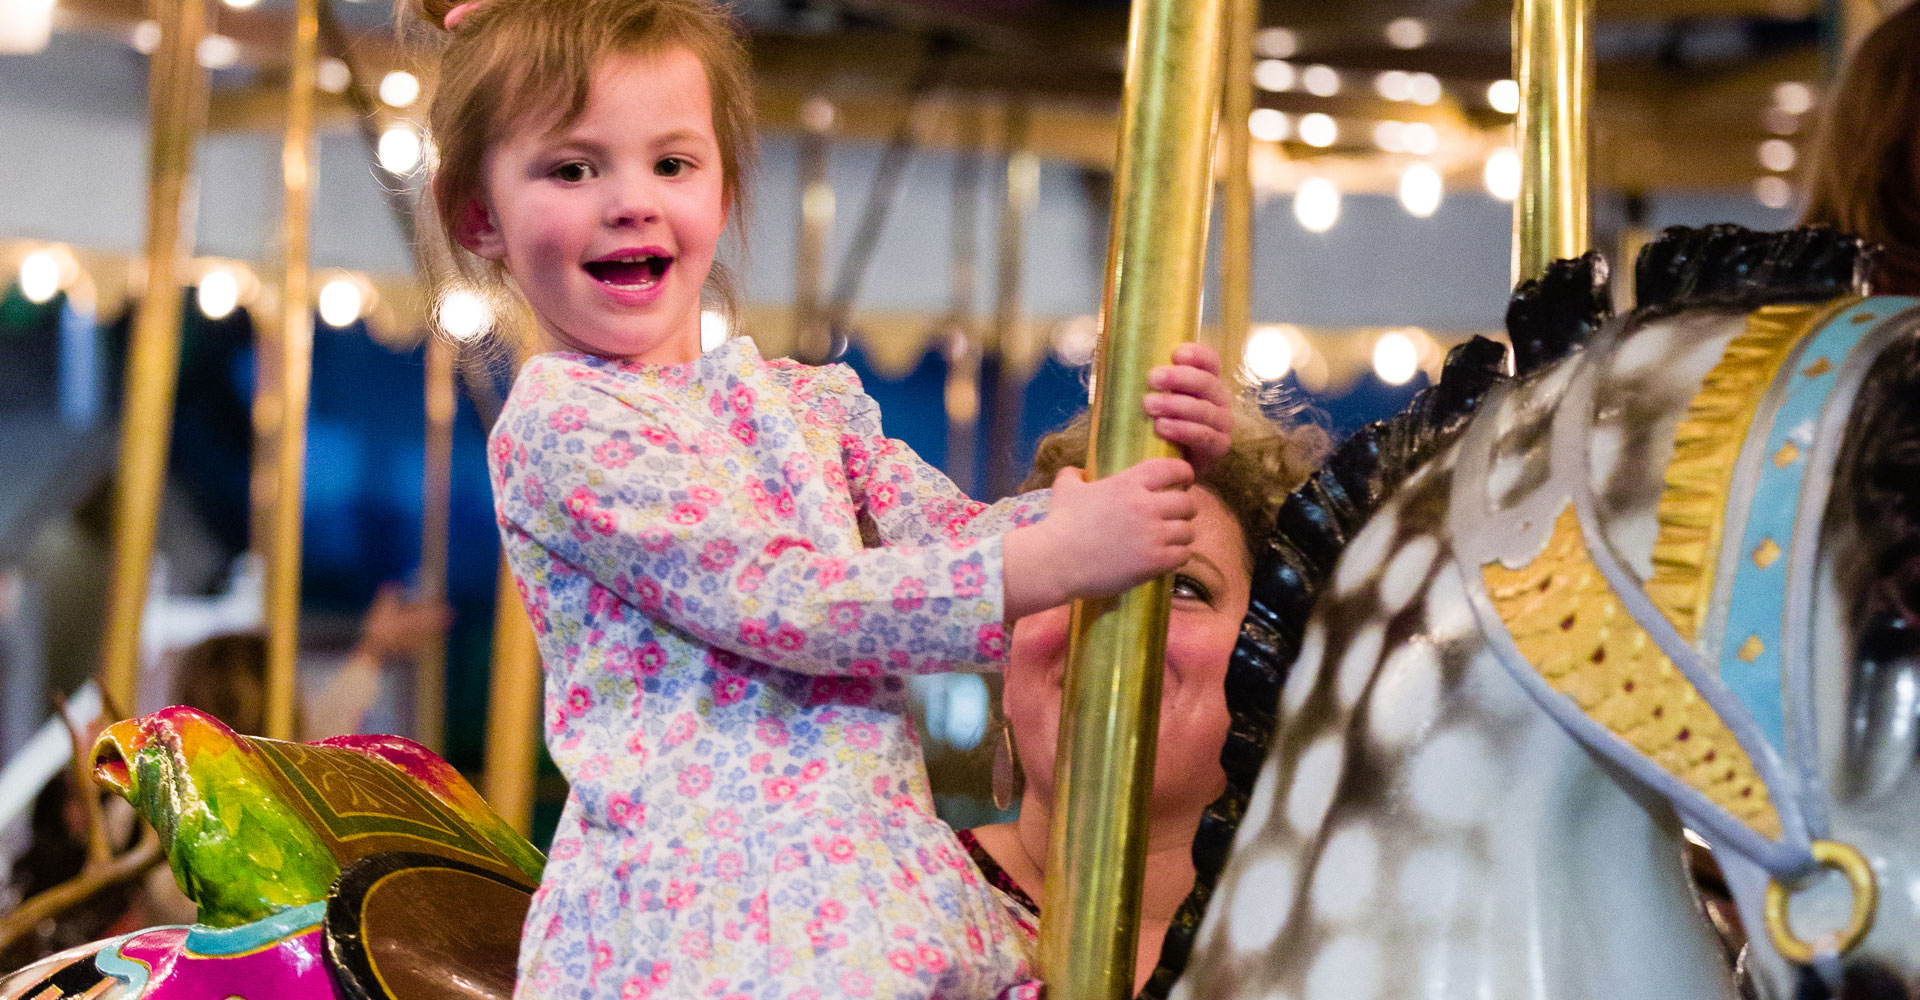 Small child with short brown hair smiling and sitting on a Carousel horse.